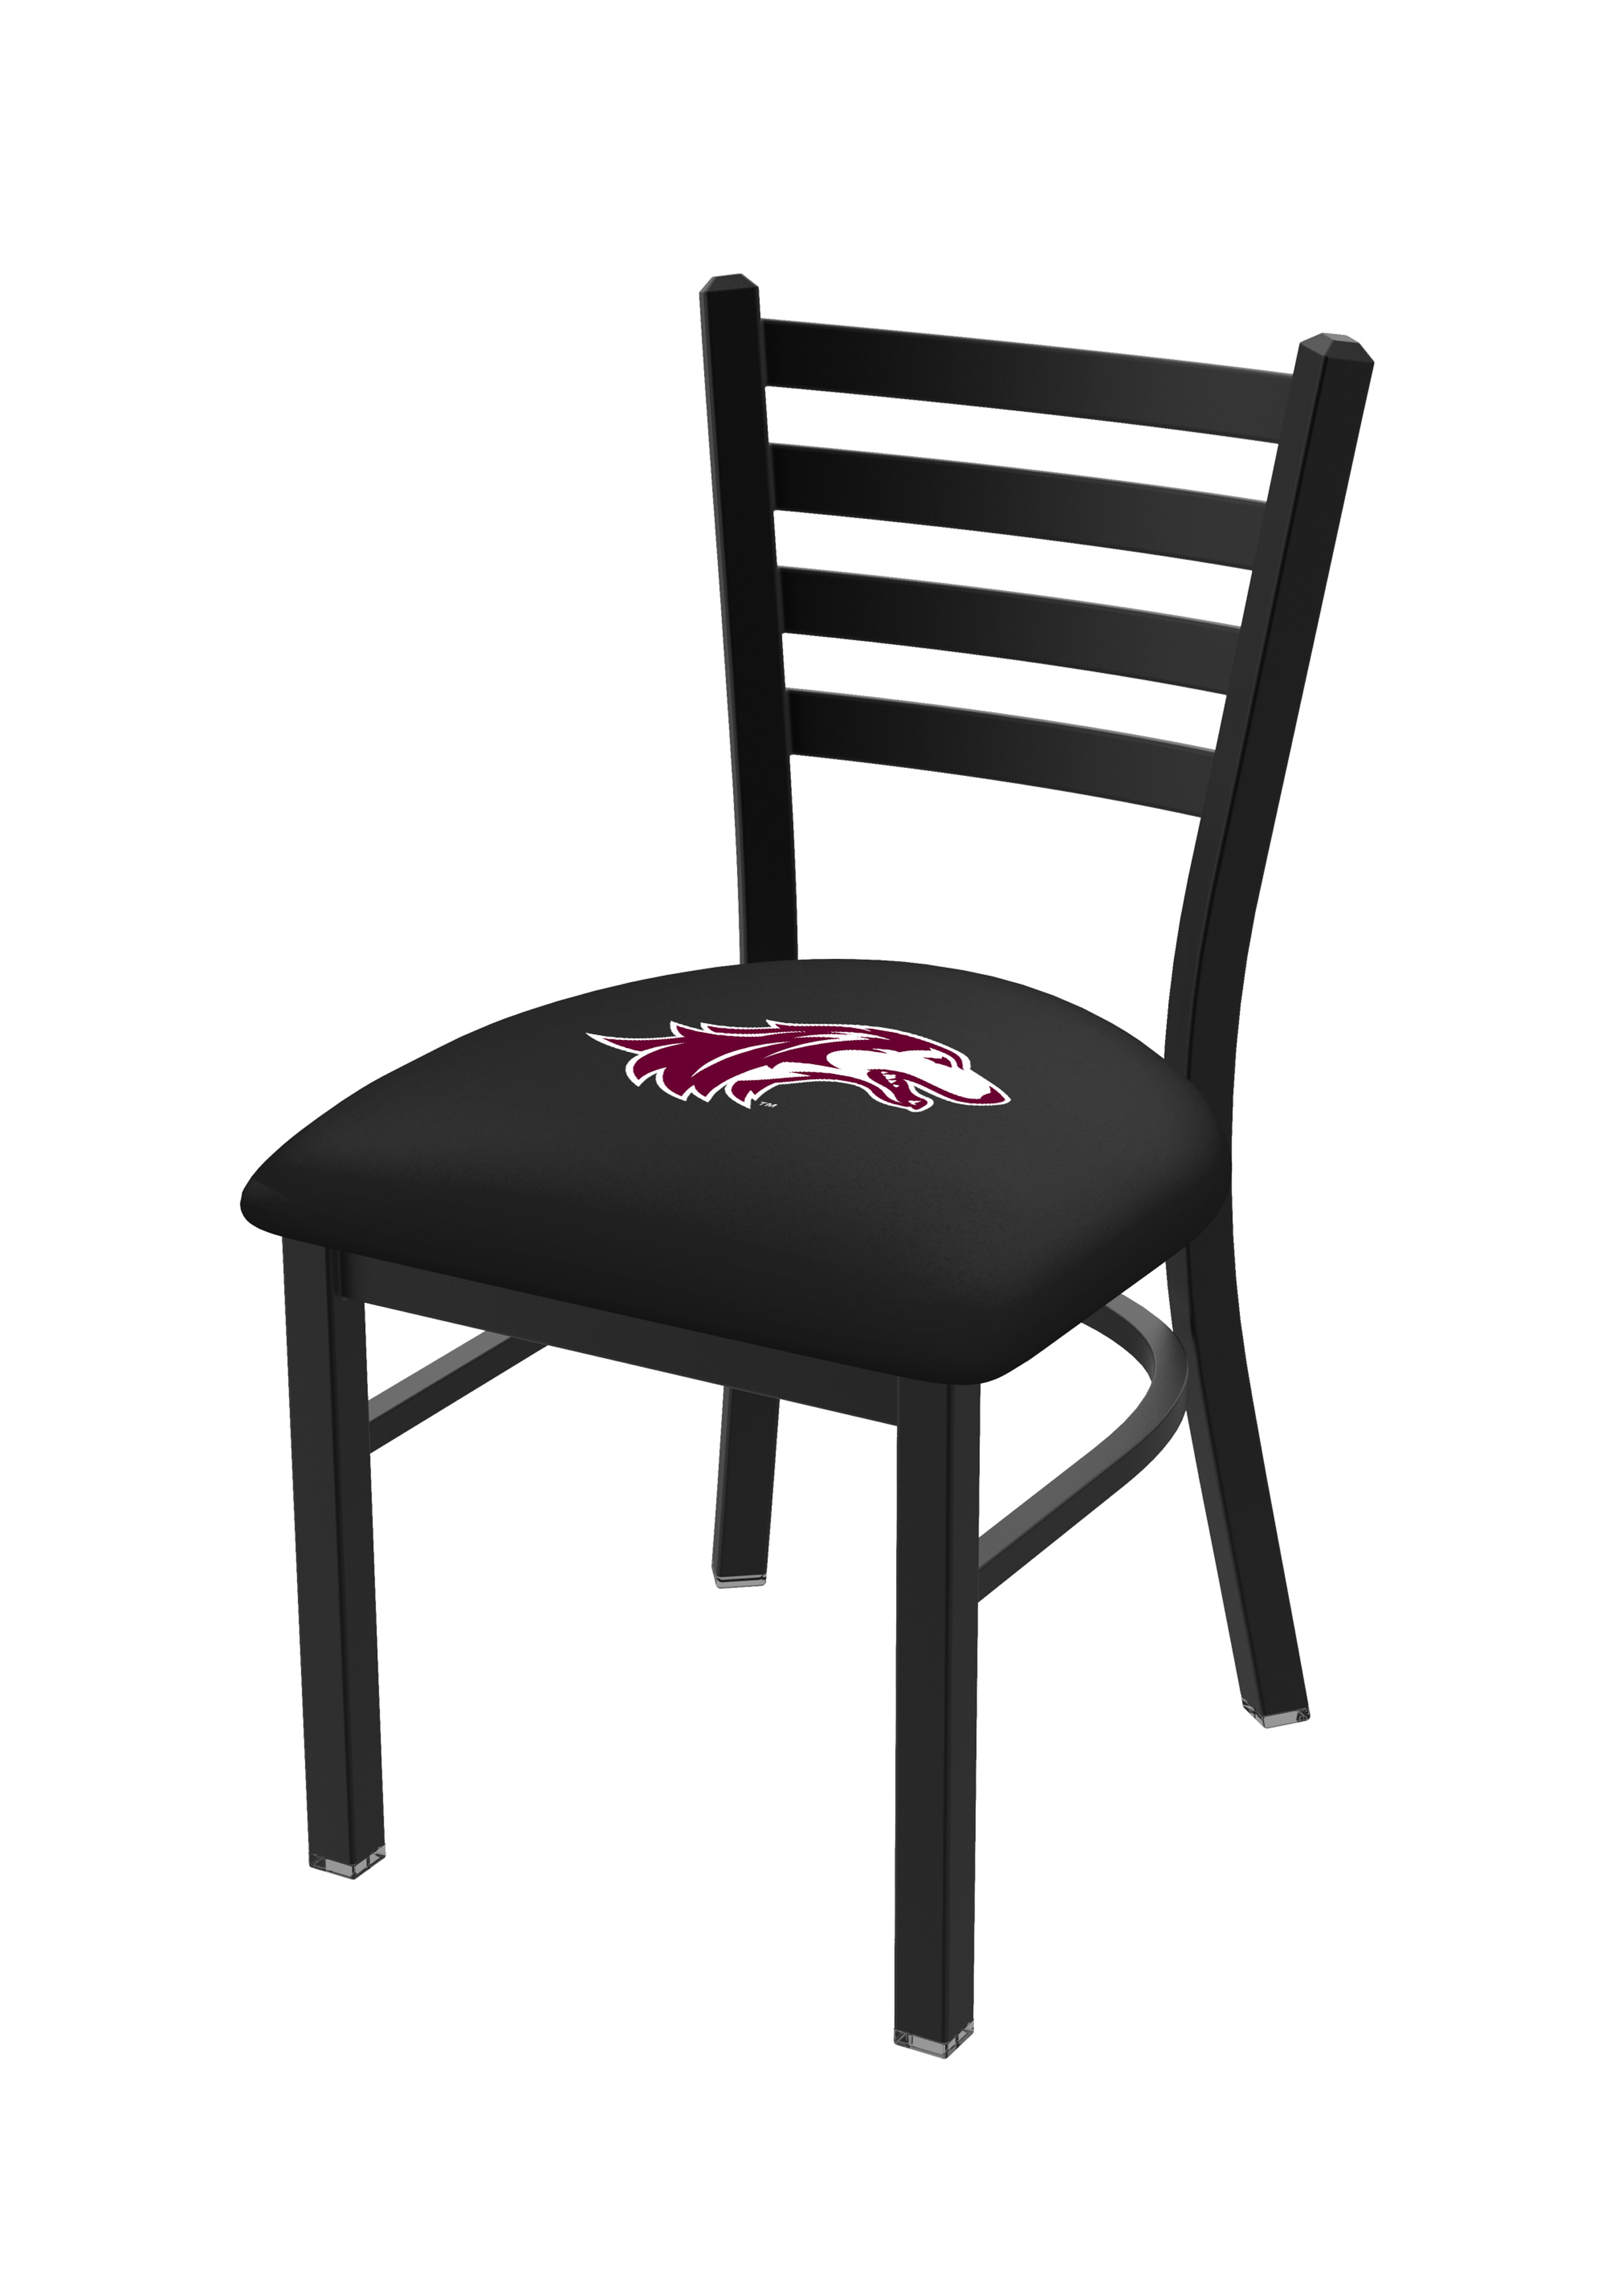 Picture of Holland Bar Stool L00418SouIll 18 in. Southern Illinois Chair with Salukis Logo